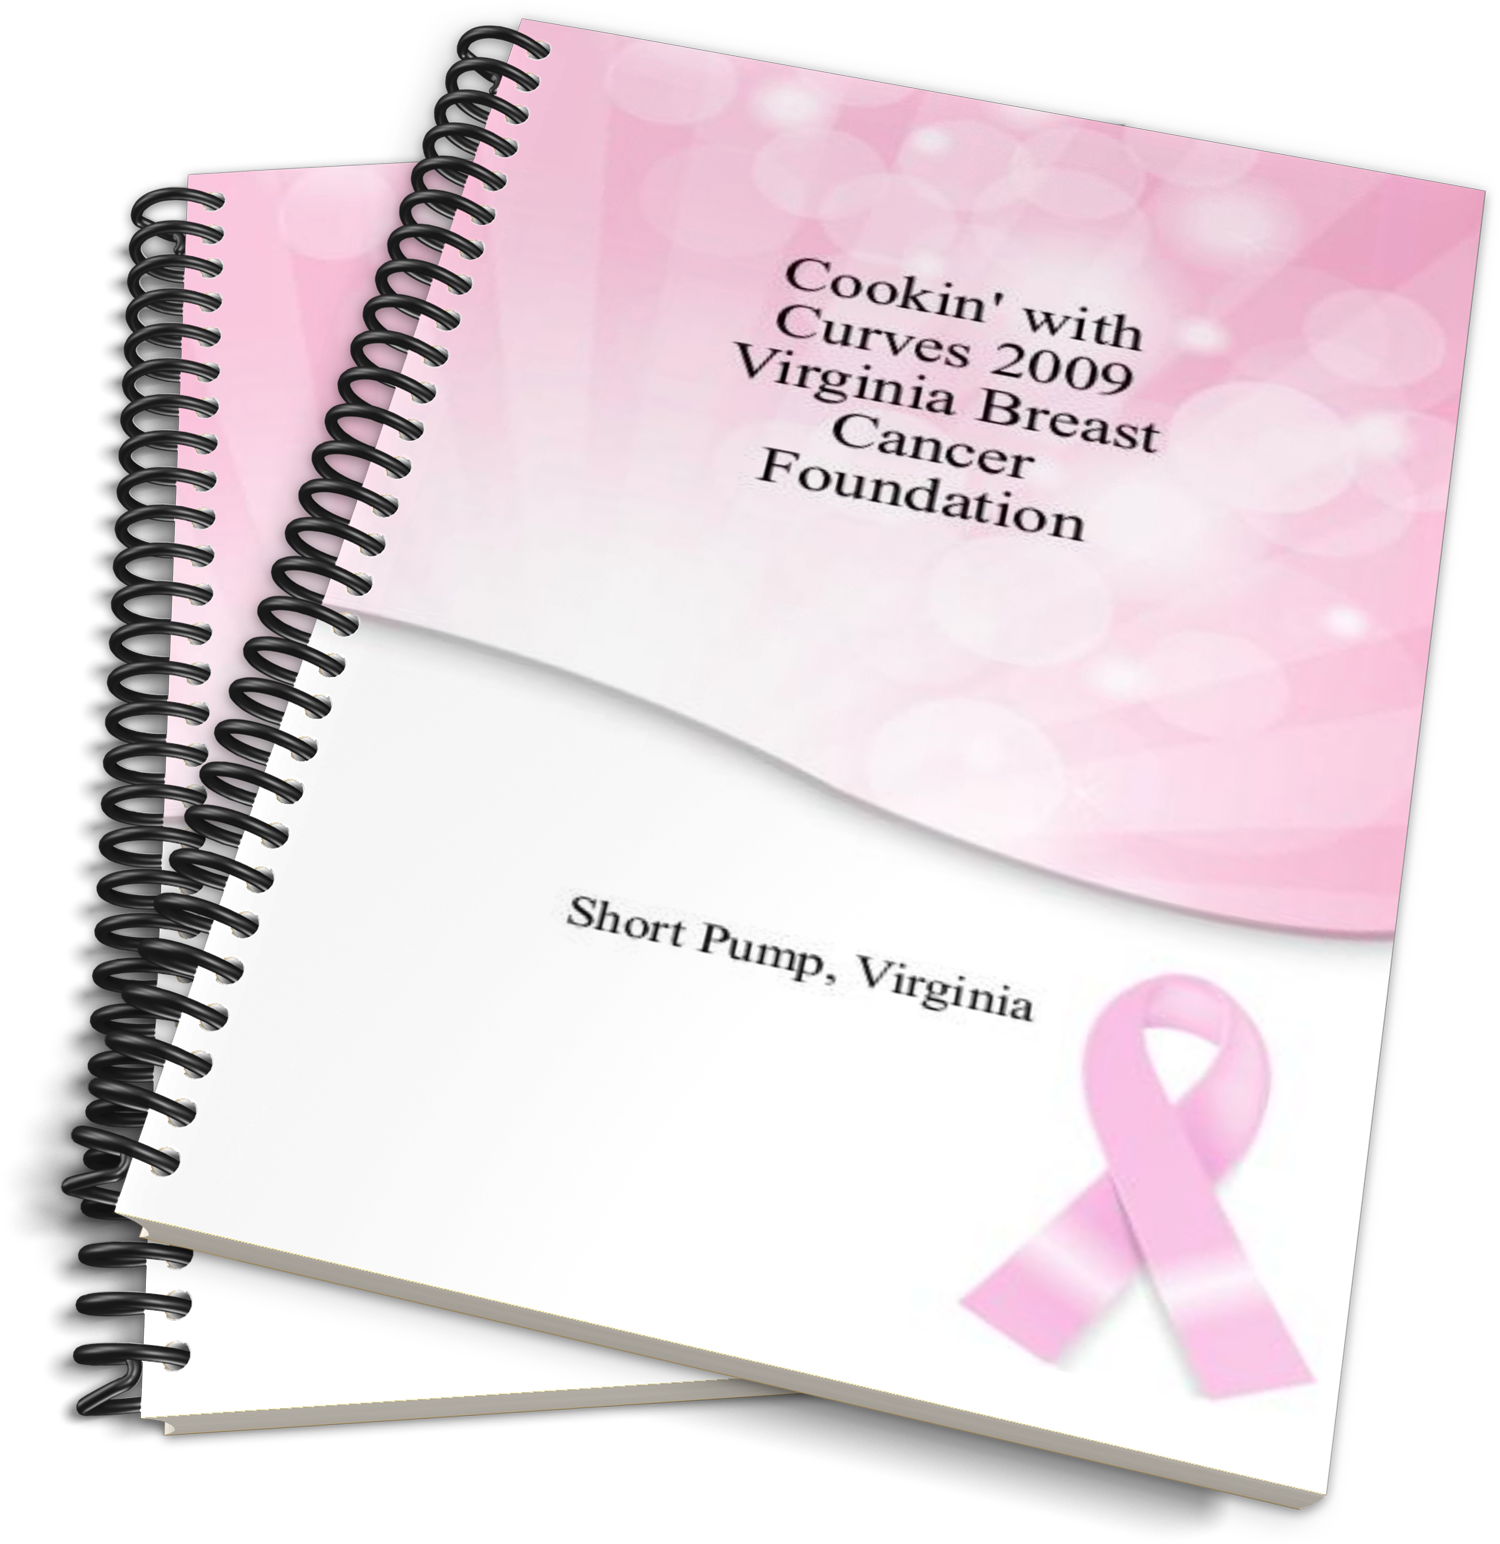 Community cookbook cover of Cookin' with Curves Virginia Breast Cancer Foundation Fundraiser raised money for cancer research